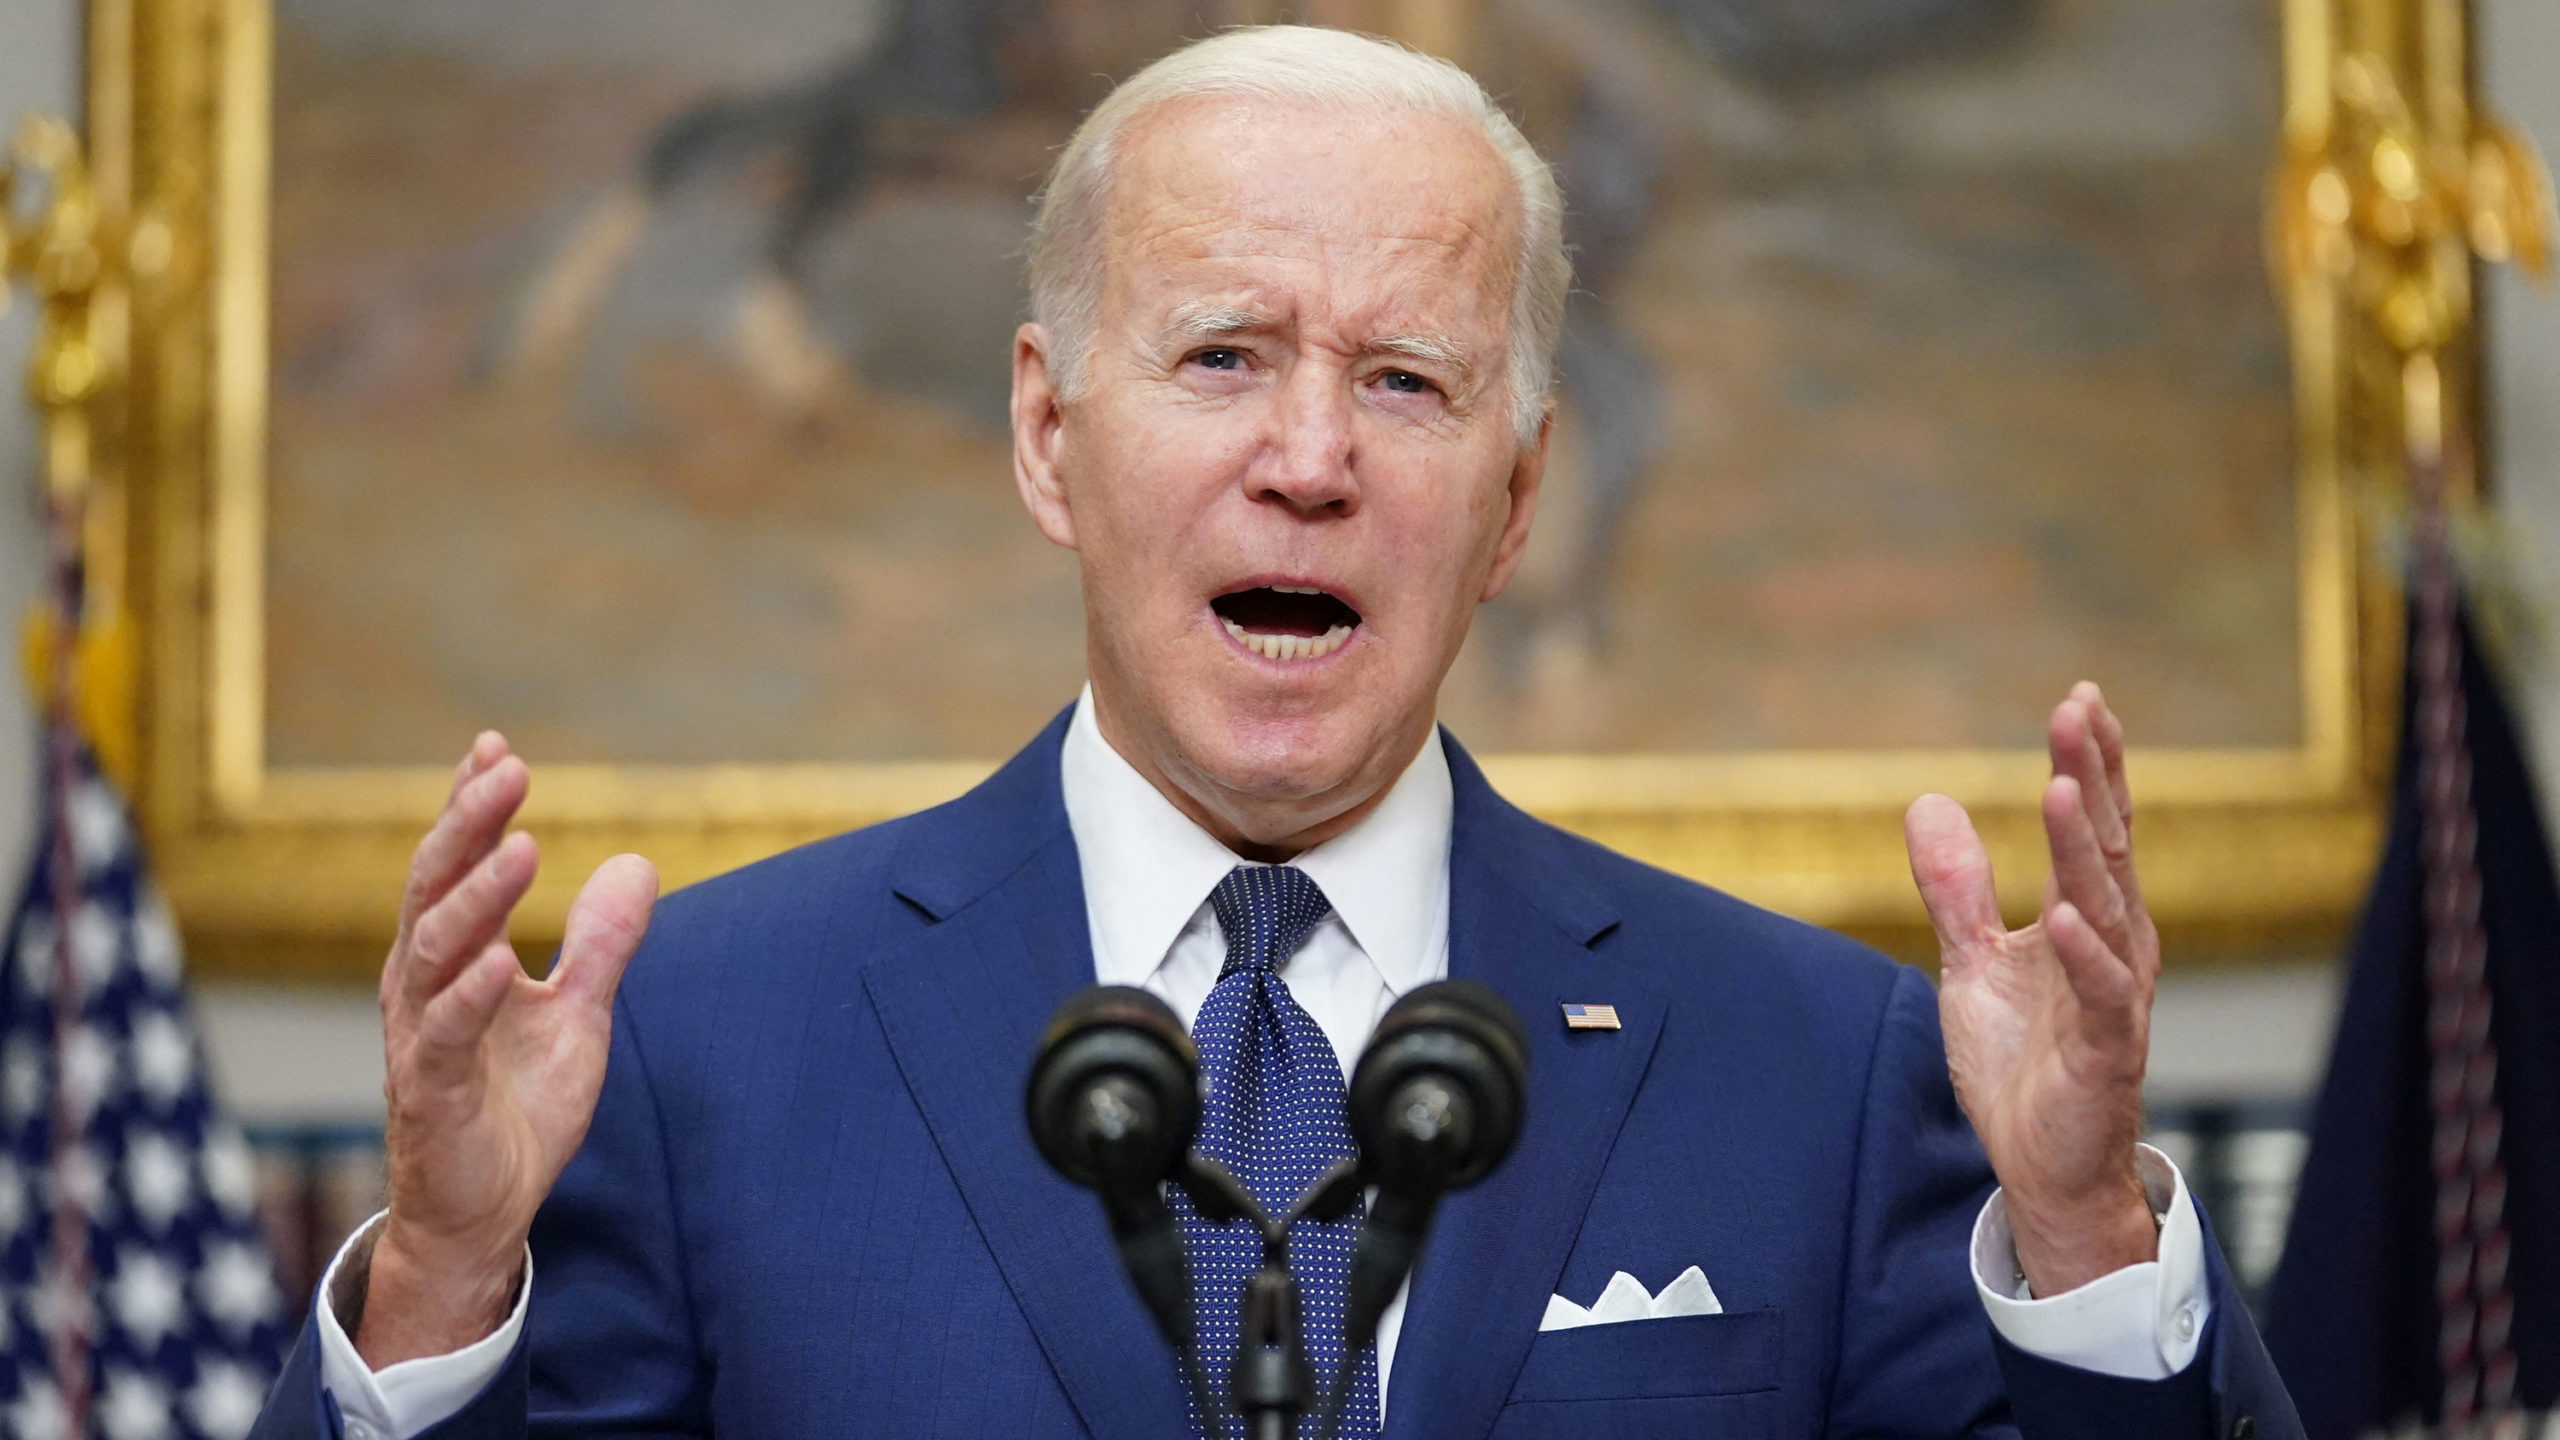 U.S. President Joe Biden makes a statement about the school shooting in Uvalde, Texas shortly after...